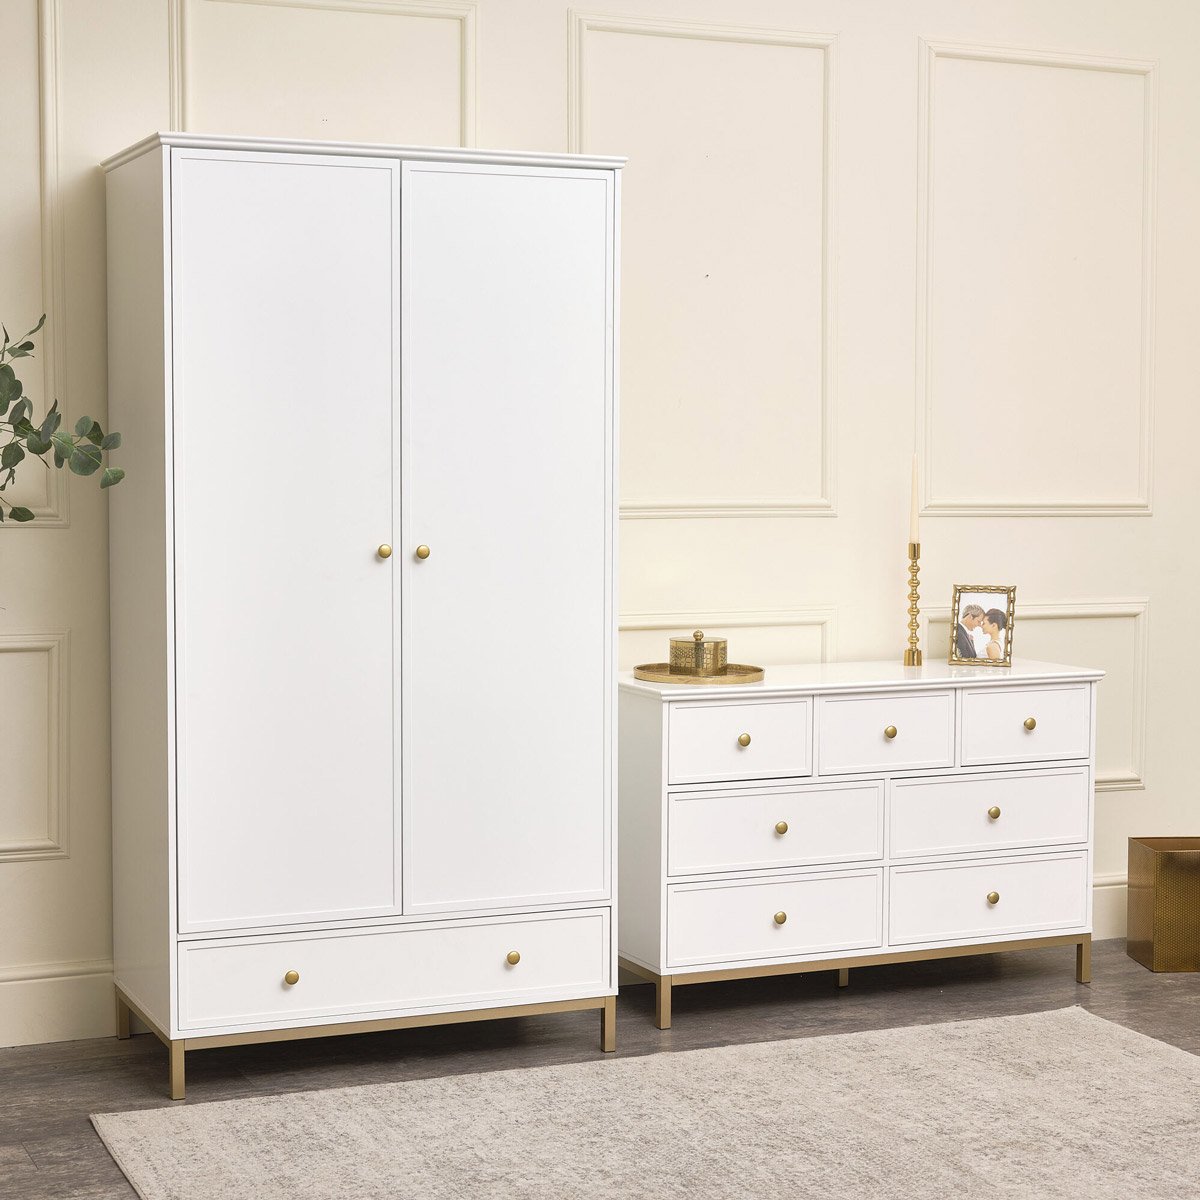 Double Wardrobe & Chest of Drawers - Aisby White Range